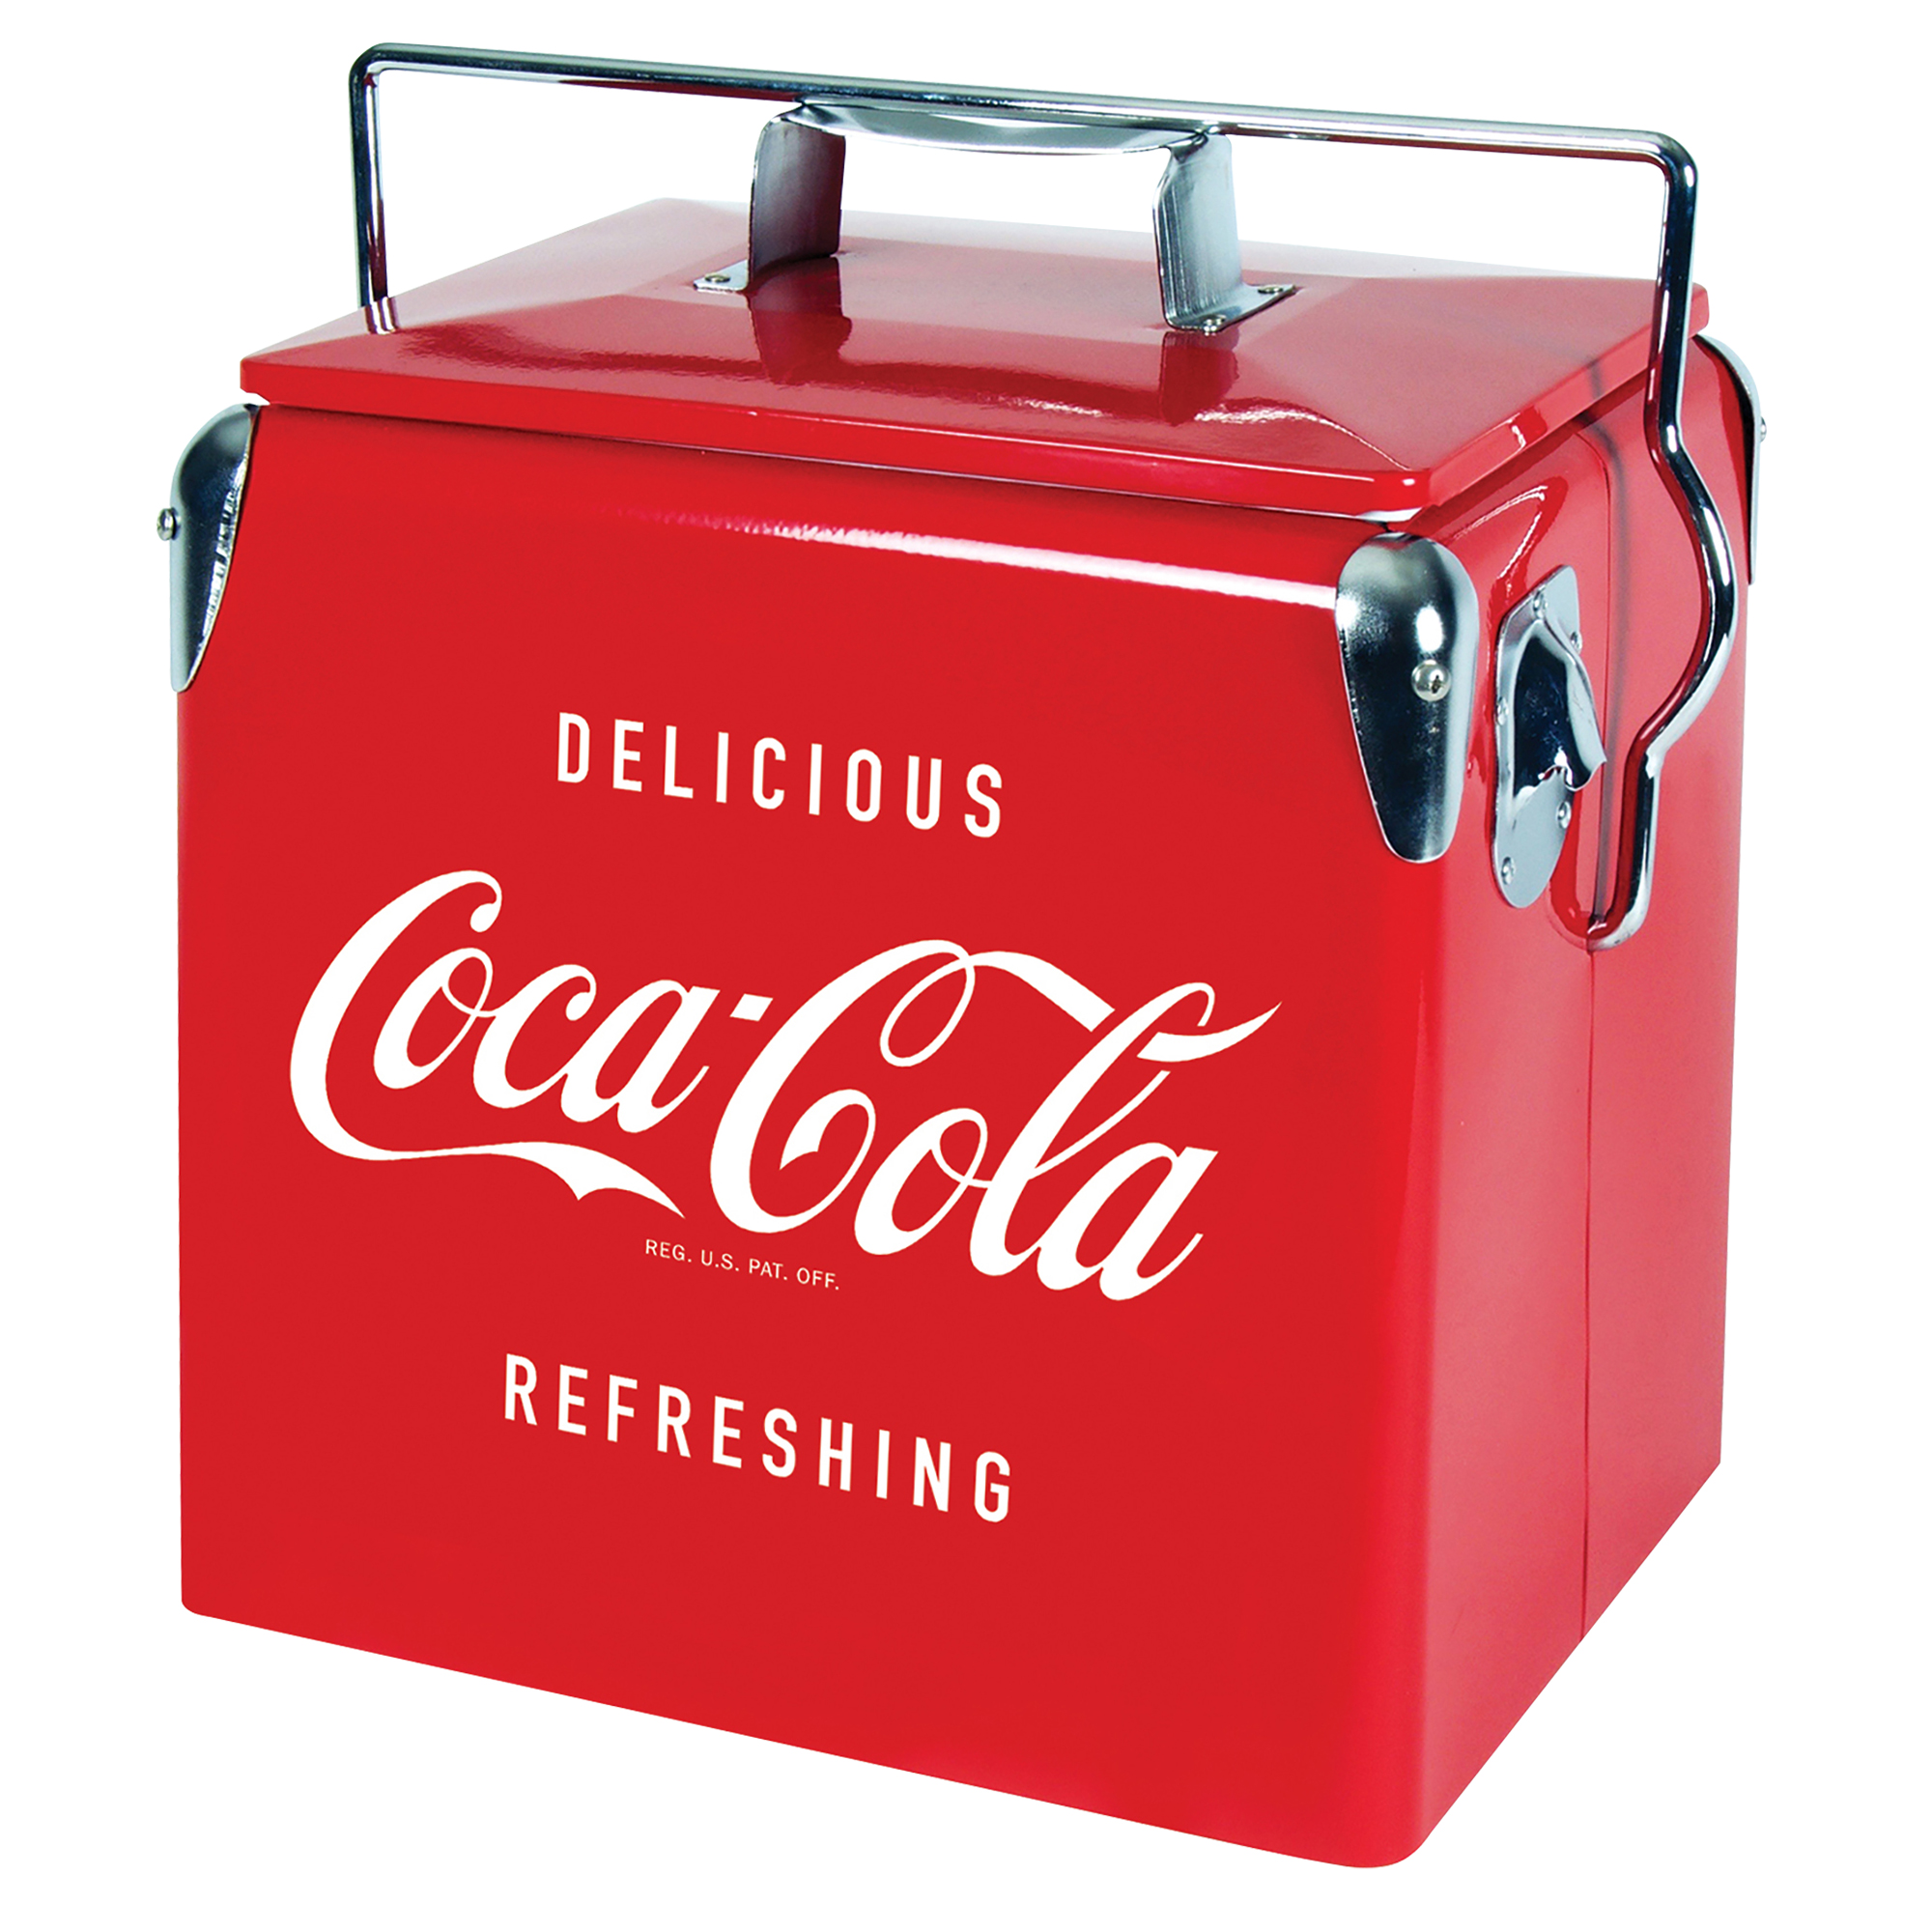 Coca-Cola Retro Portable Ice Chest Cooler with Bottle Opener 13L (14 qt), 18 Can Capacity, Red Vintage Style Ice Bucket for Camping, Beach, Picnic, RV, BBQs, Tailgating, Fishing - image 1 of 7